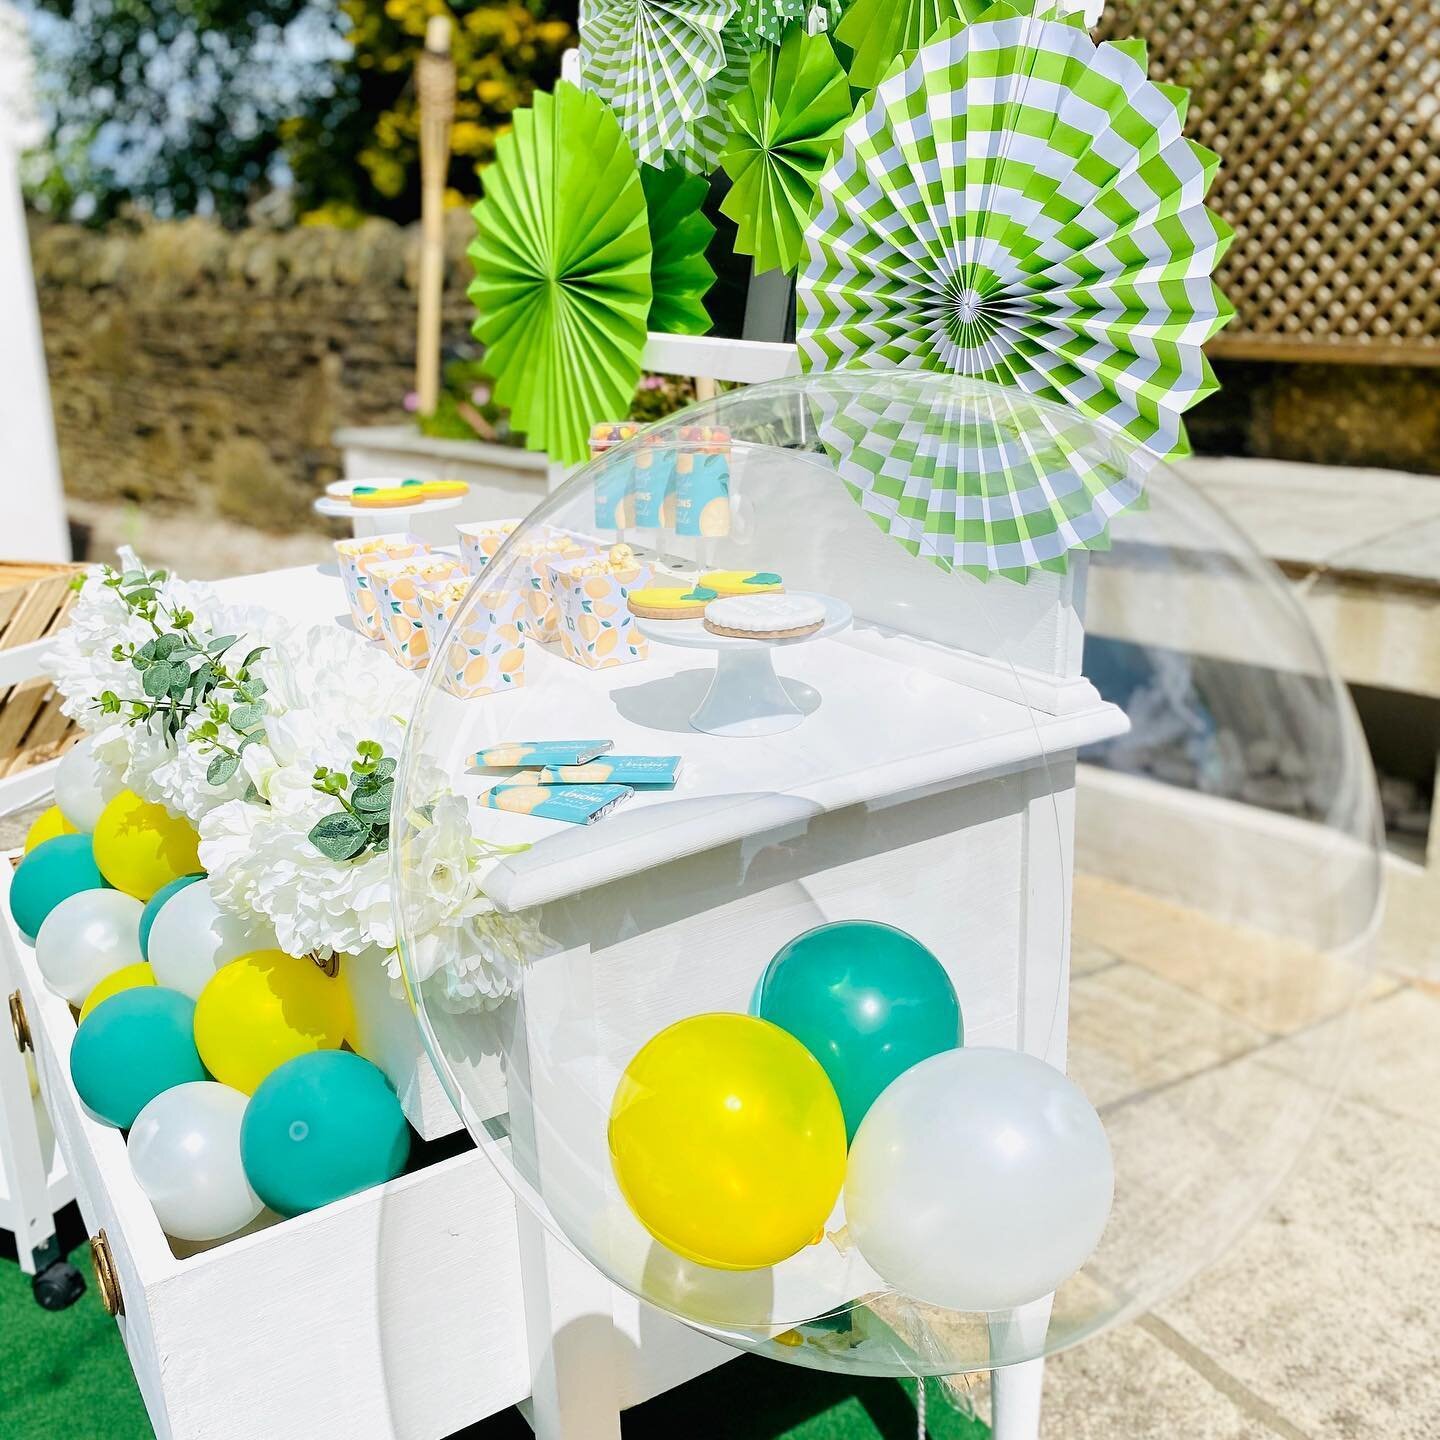 With a fresh colour palette of white, lemon and green this is a summer party for sure!! We love the giant clear orb balloon with mini balloons inside. 😍